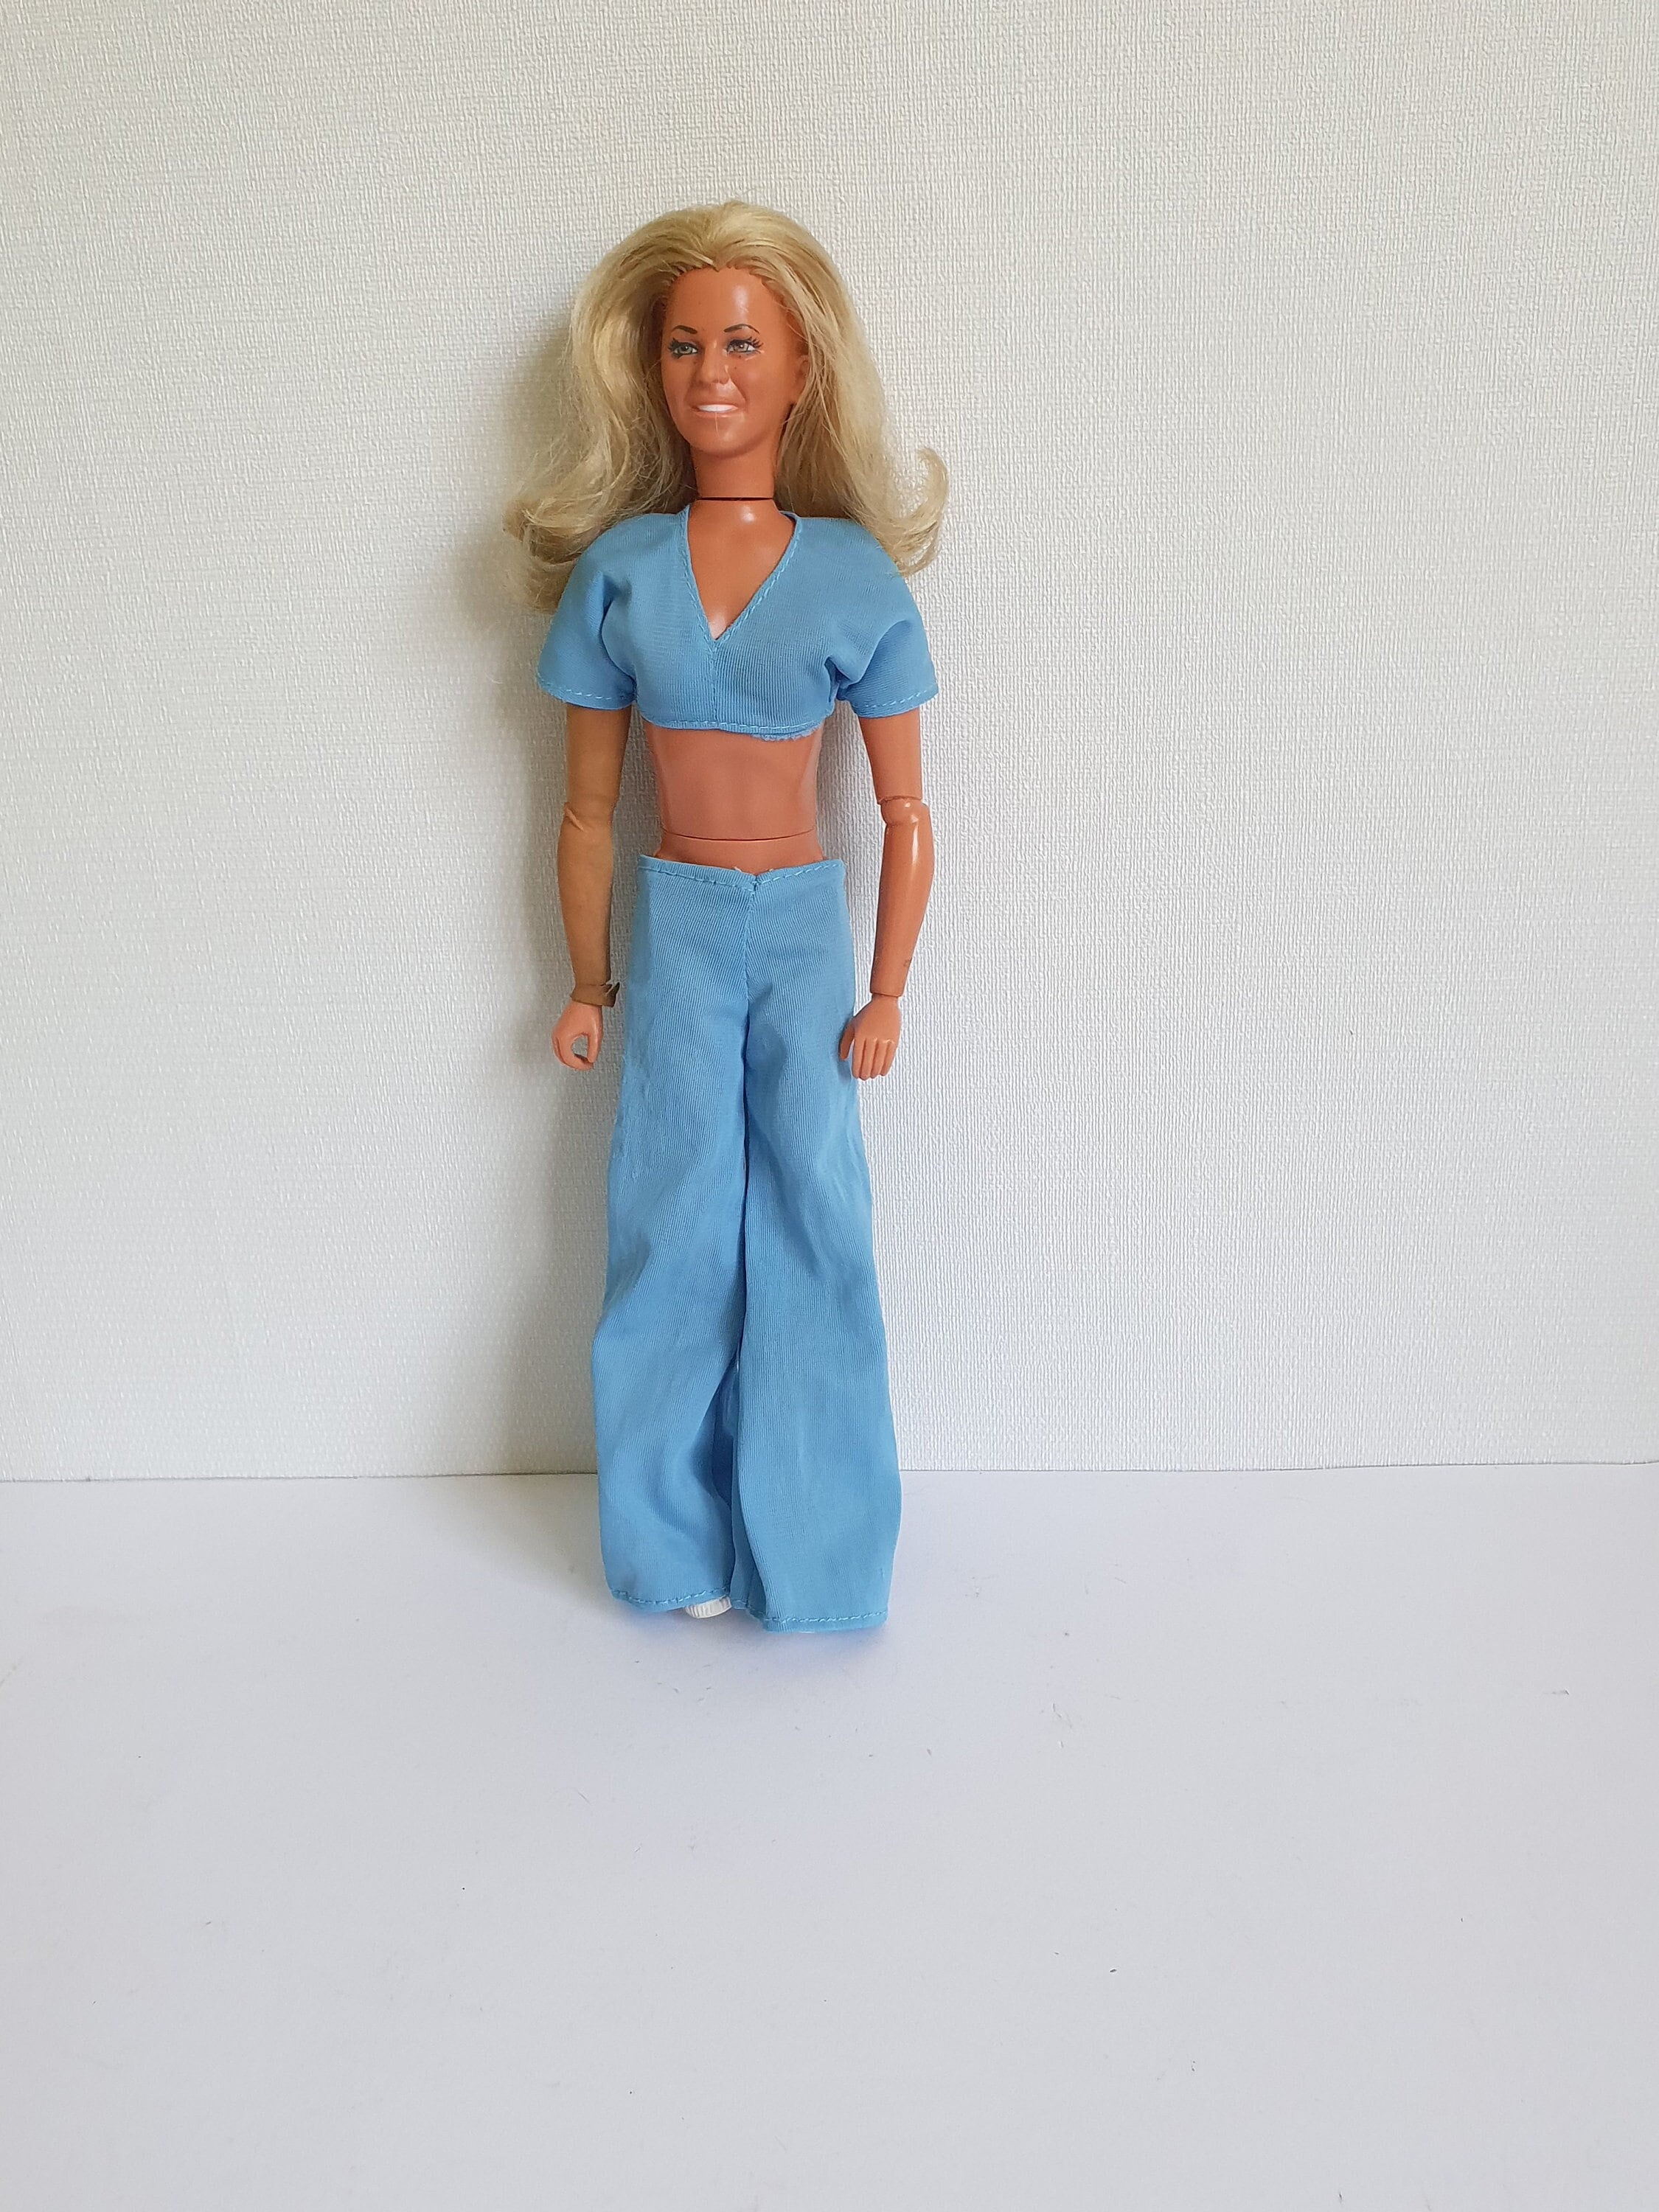 Vintage Kenner Jamie Sommers the Bionic Woman Doll W/ Blue Mist